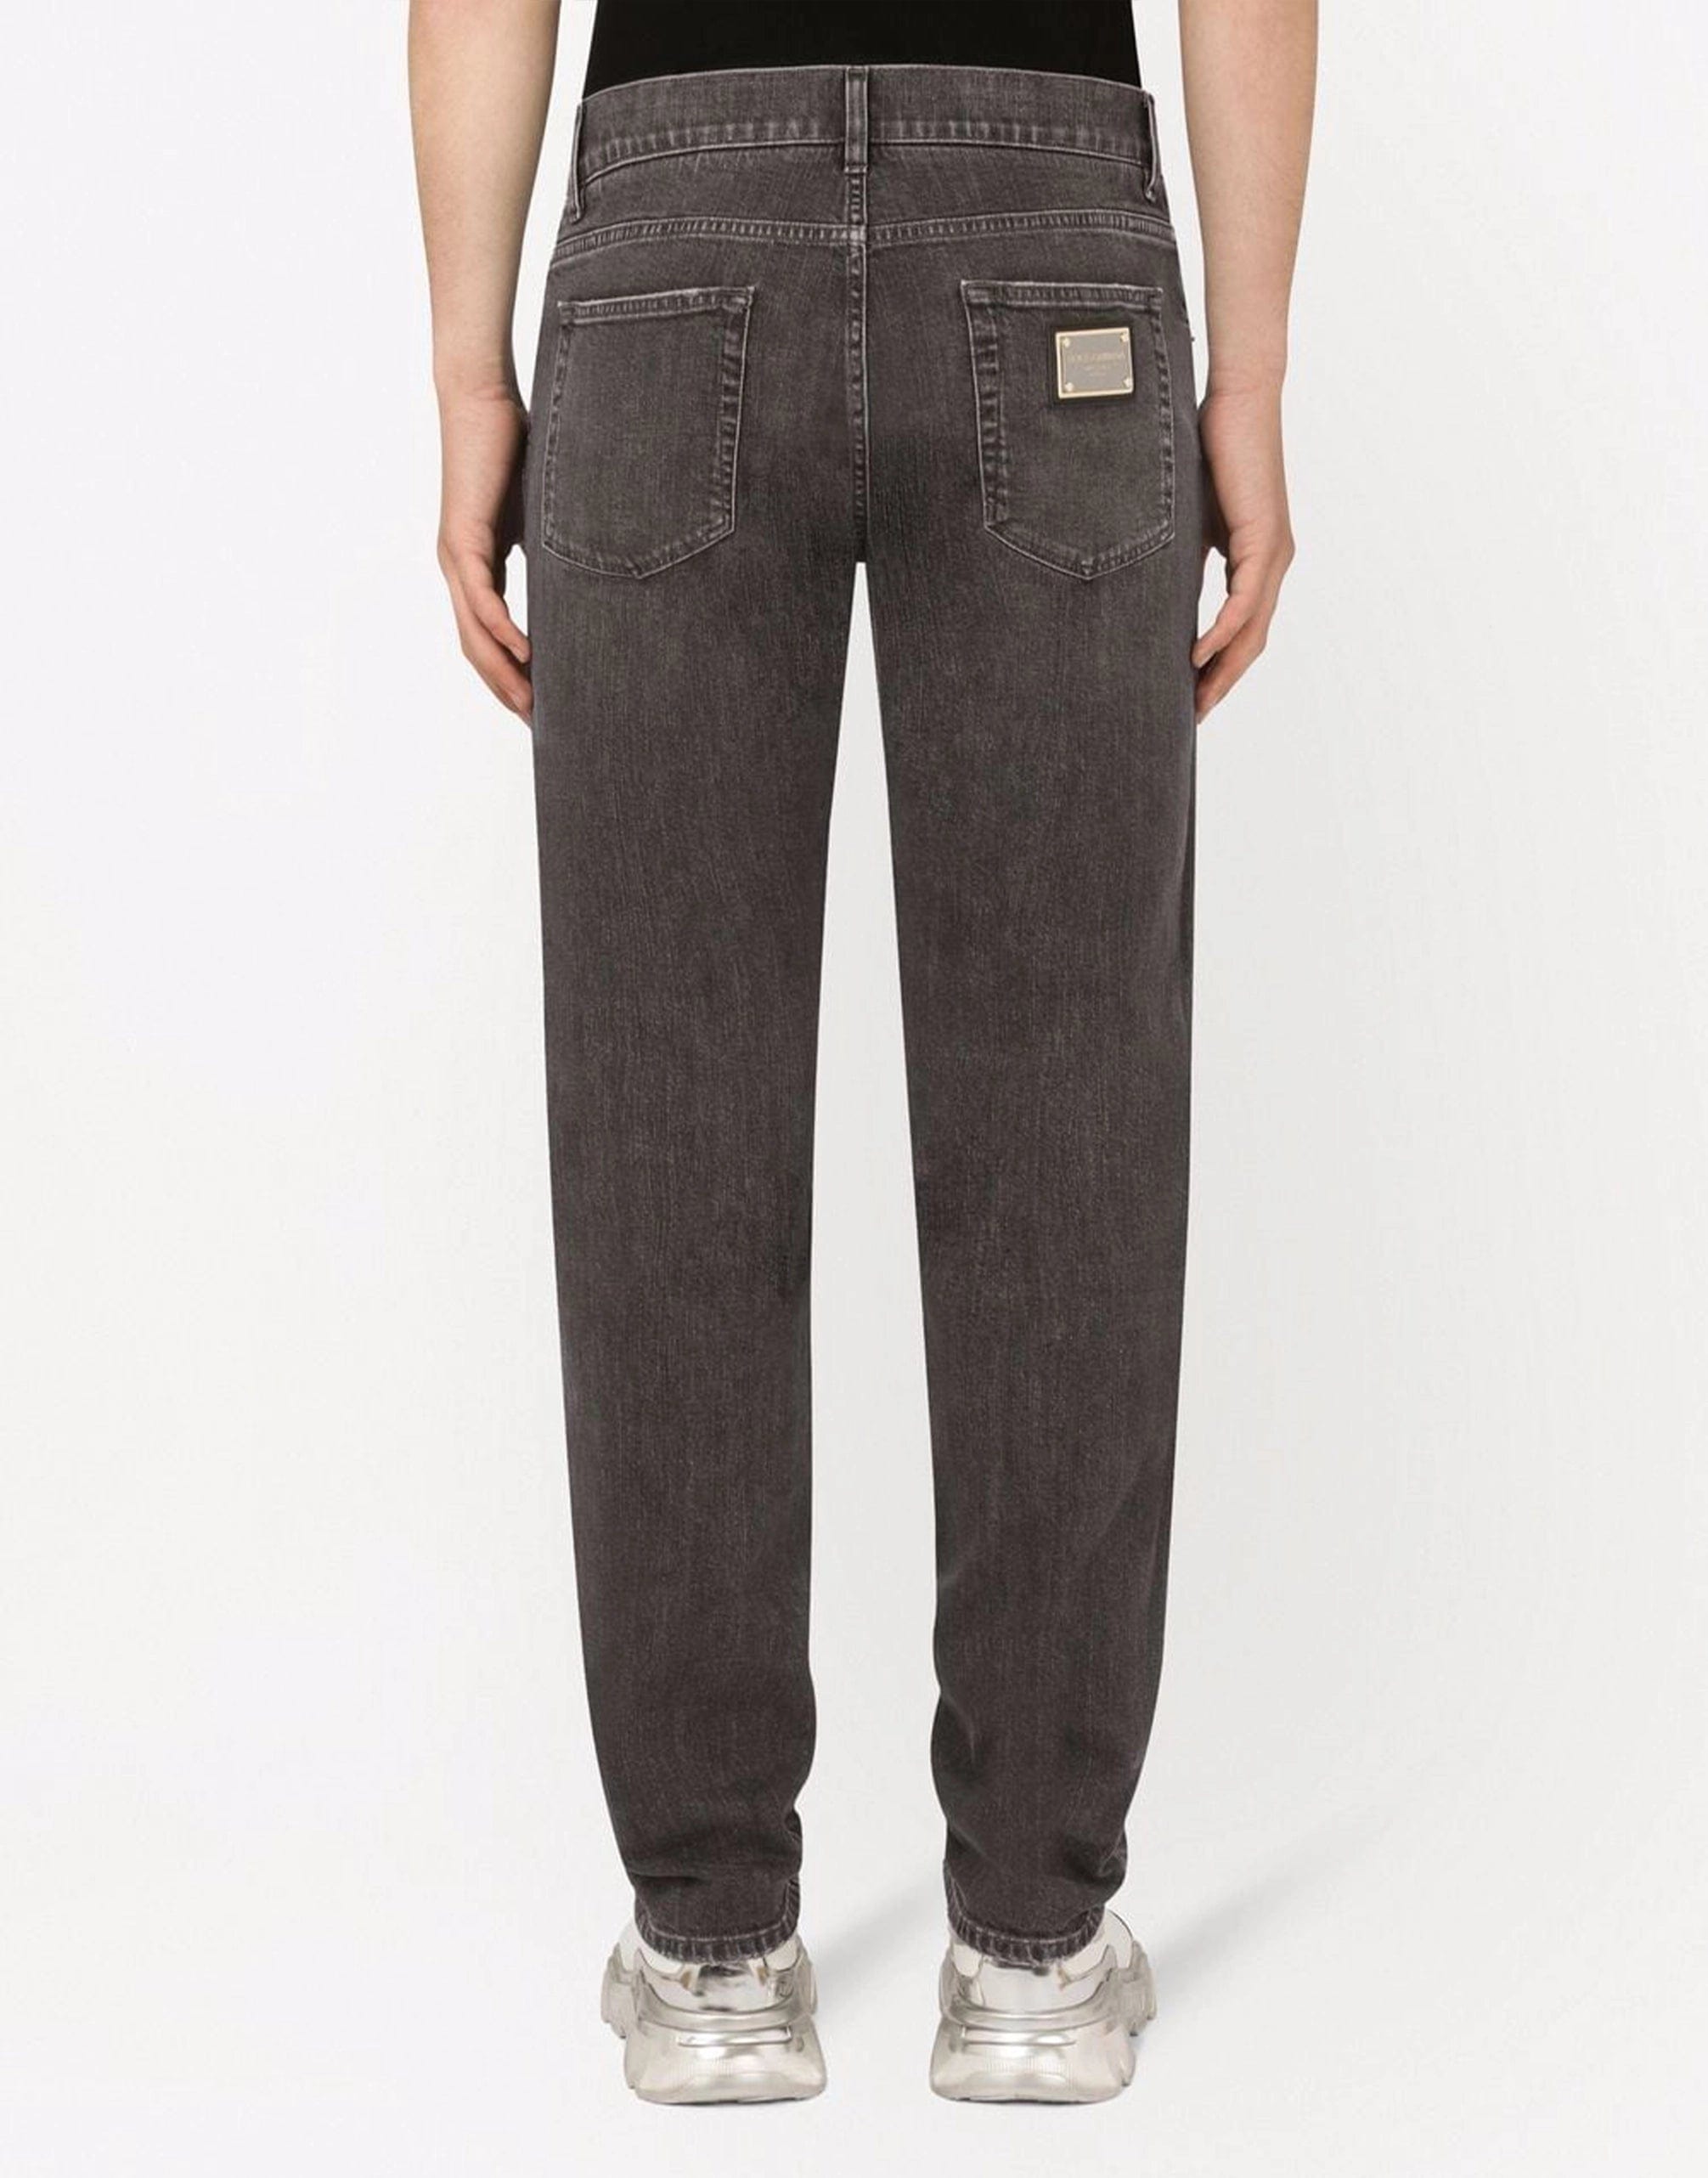 Dolce & Gabbana Slim-Fit Cotton Stretch Jeans With Rips